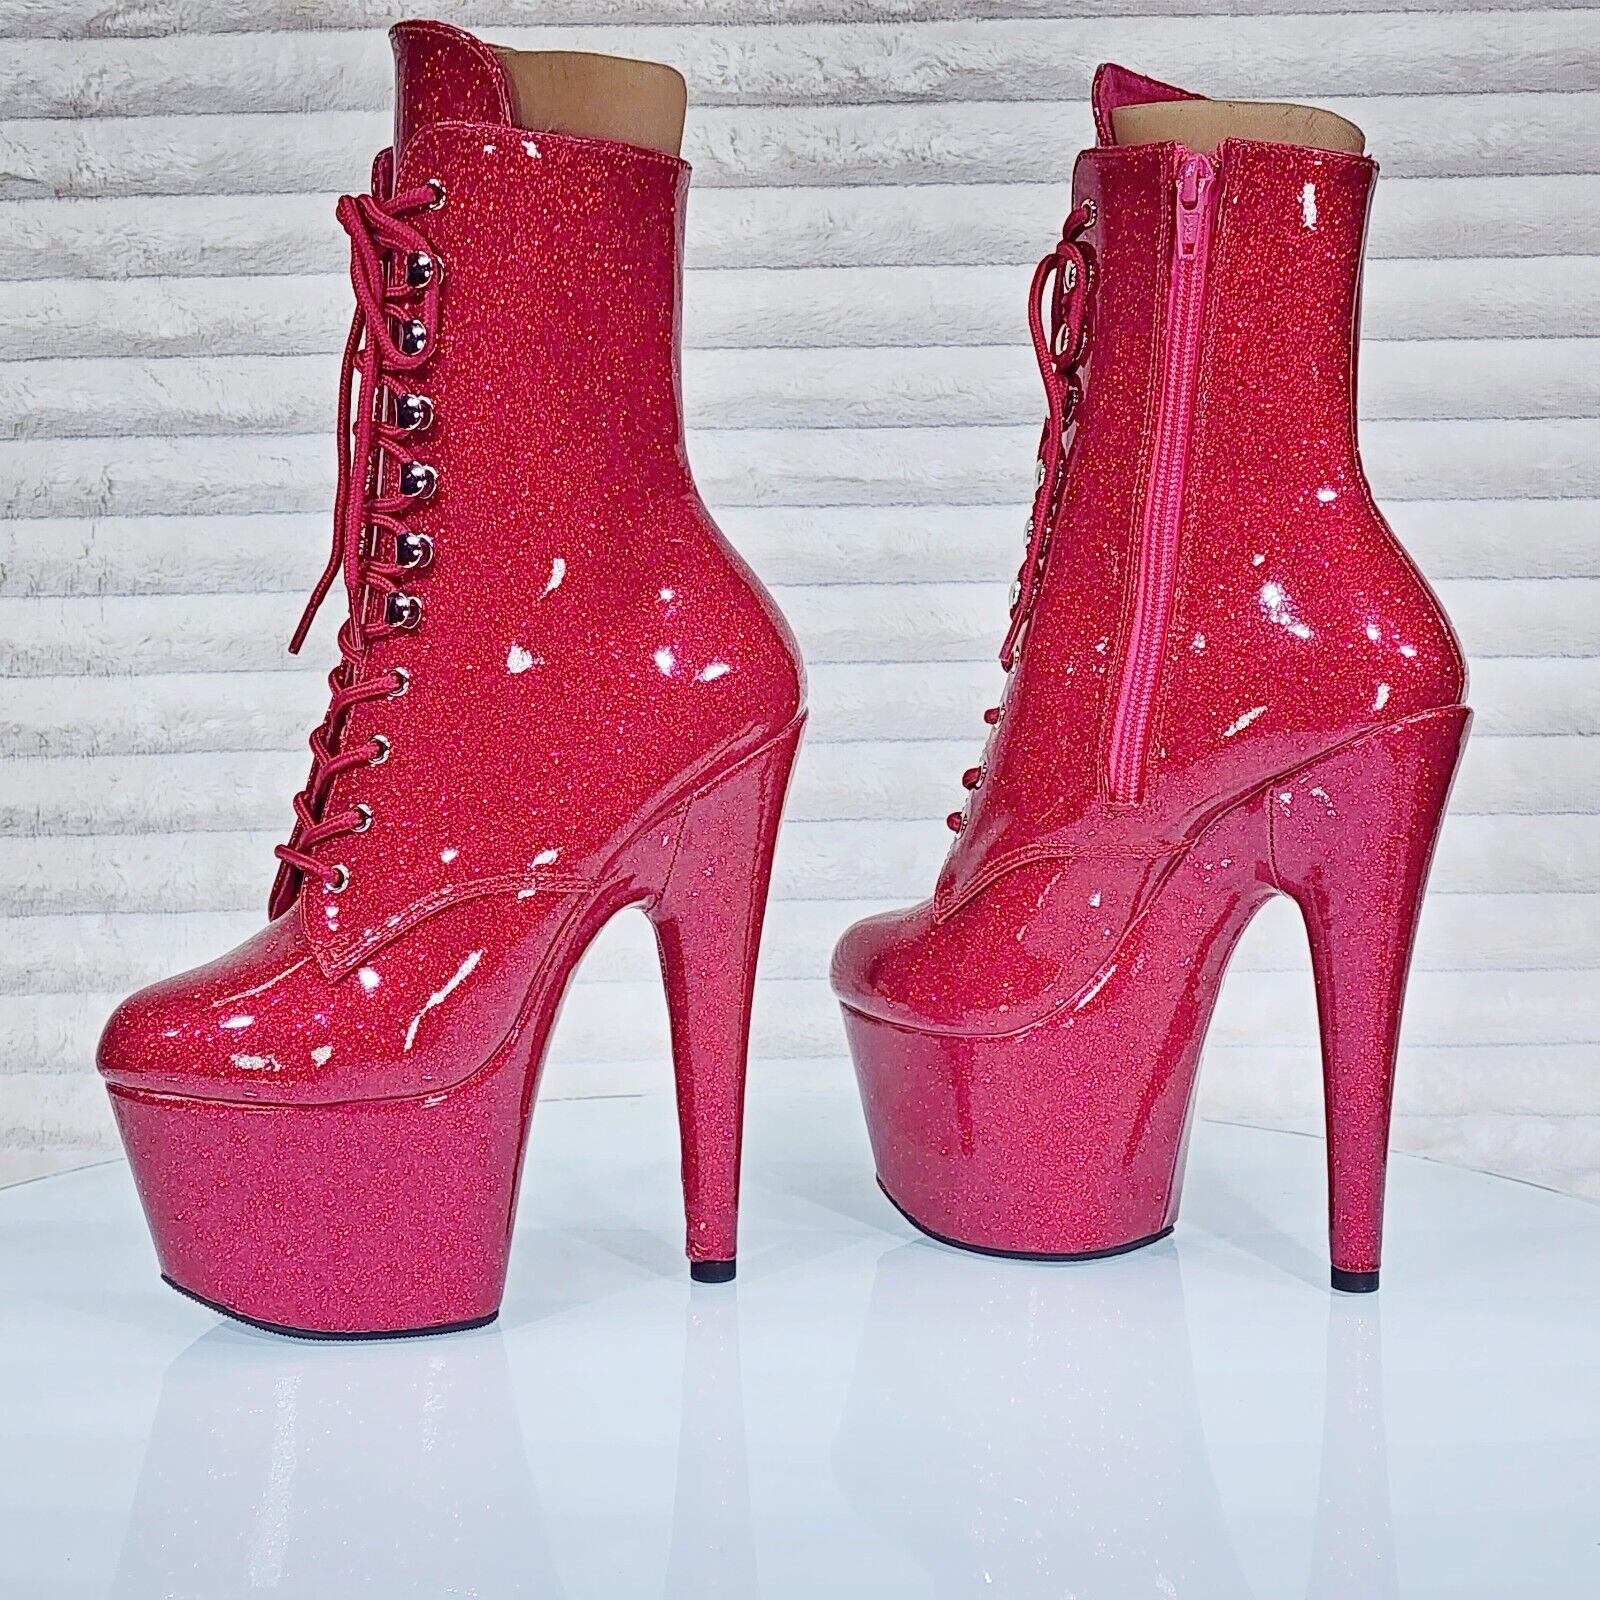 Adore 1020gp Fuchsia Pink Glitter Patent 7 High Heel Platform Ankle Boots Ny Totally Wicked 